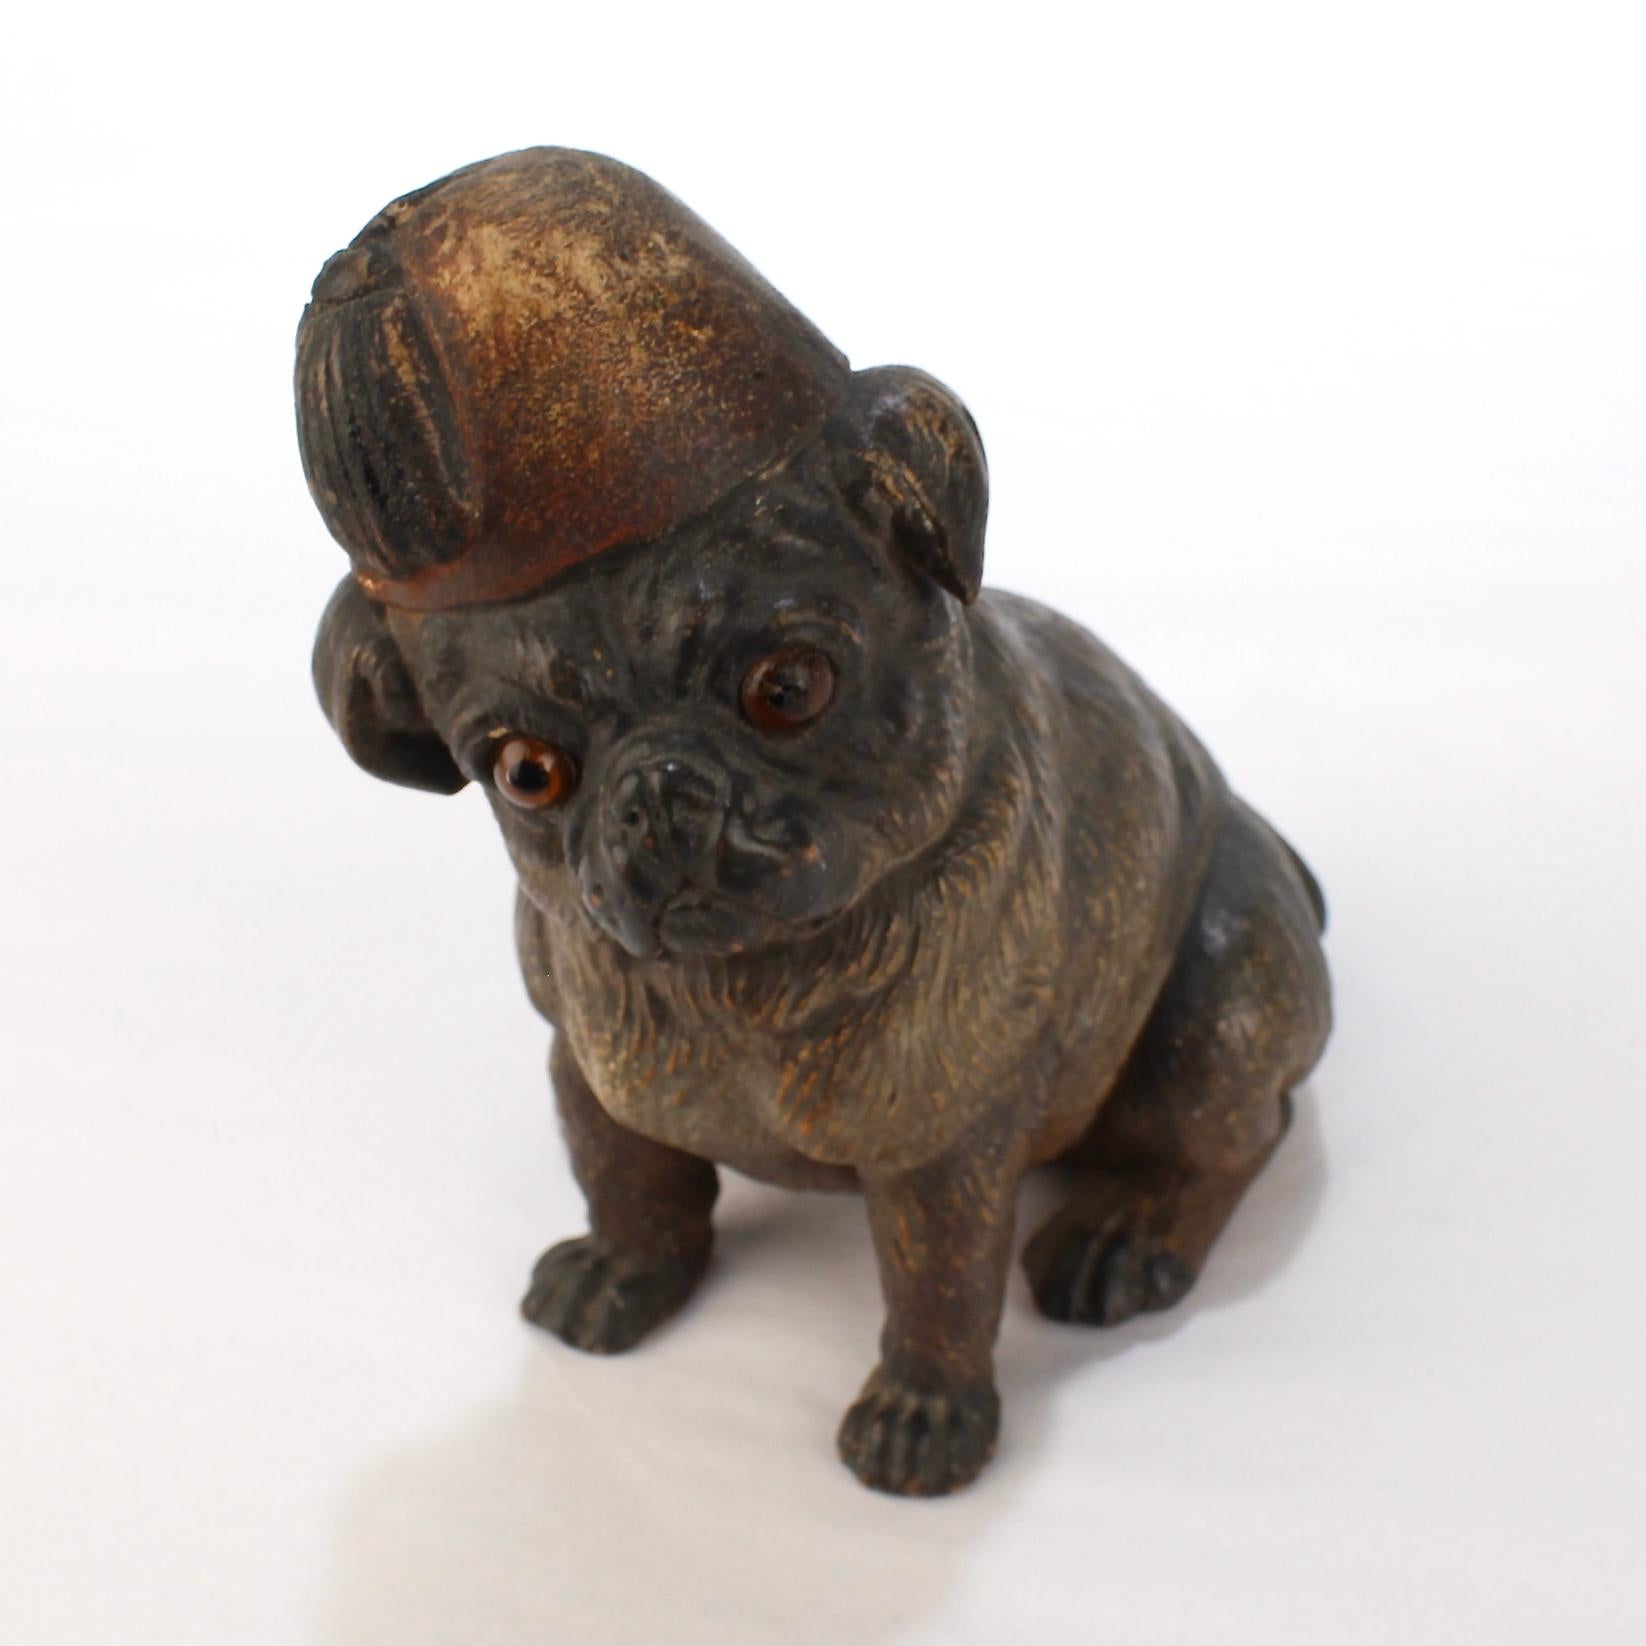 Cold-Painted Antique Terra Cotta Pottery Pug Dog Figure from the Mario Buatta Collection